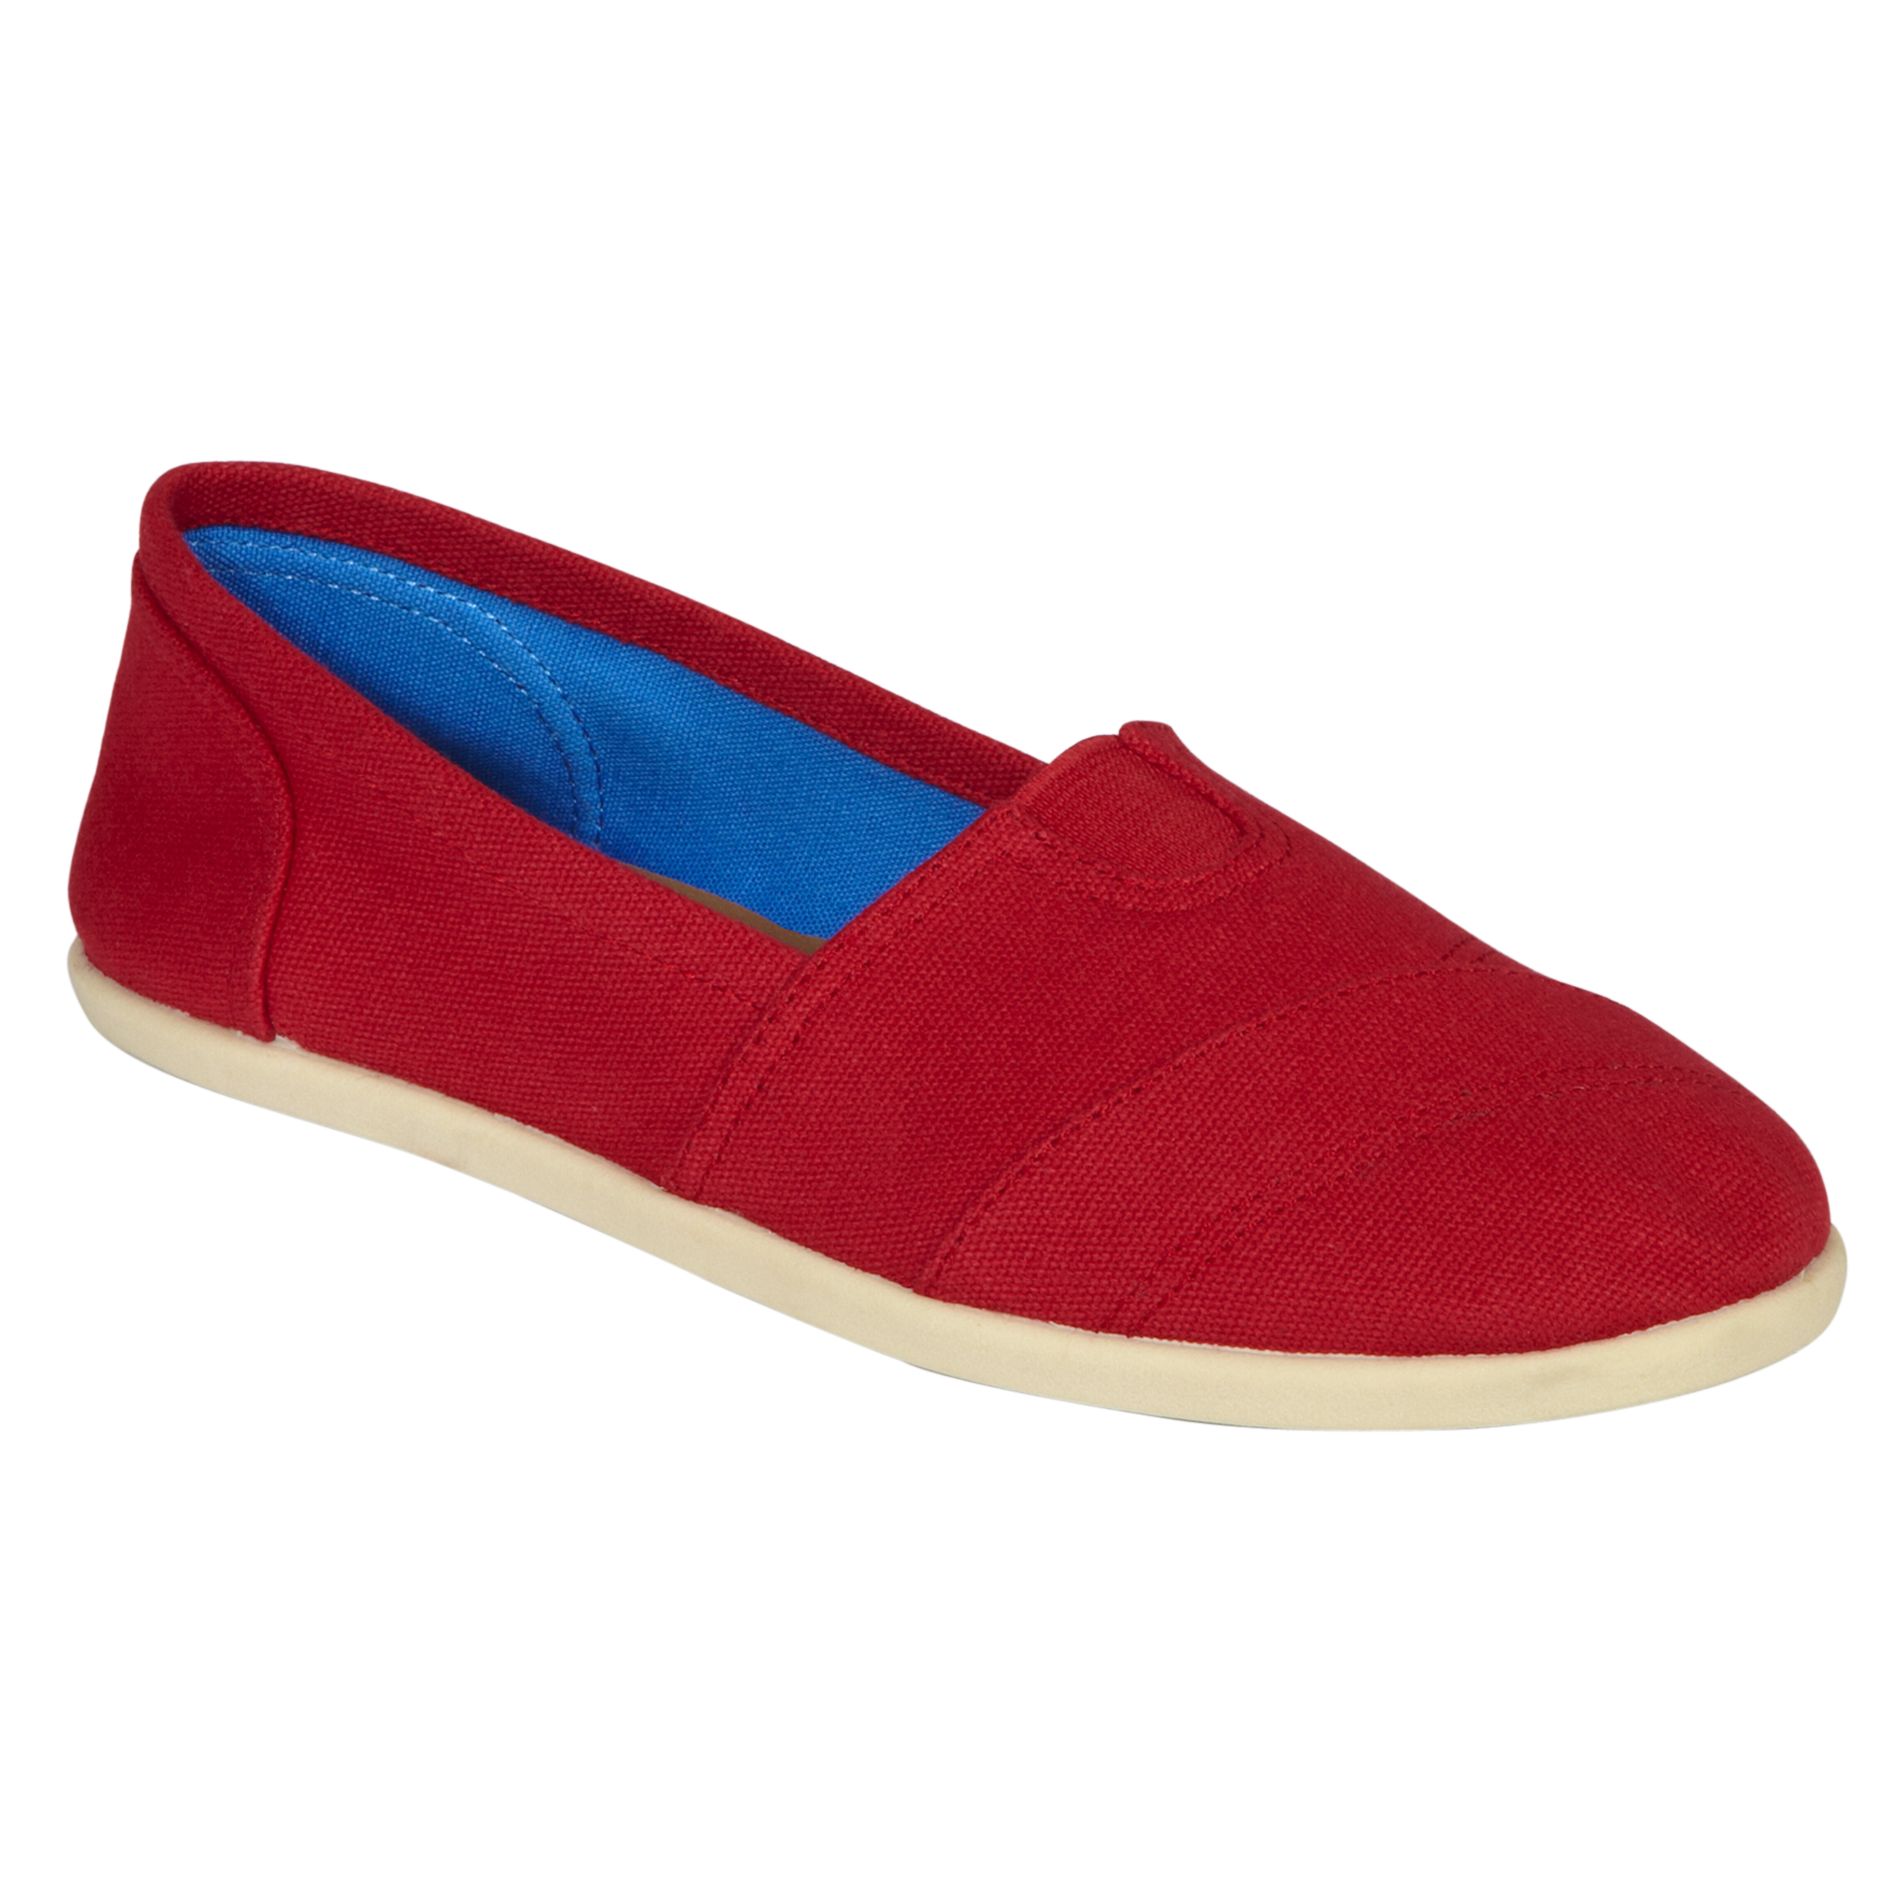 Bongo Women's Casual Canvas Shoe Prepster - Red